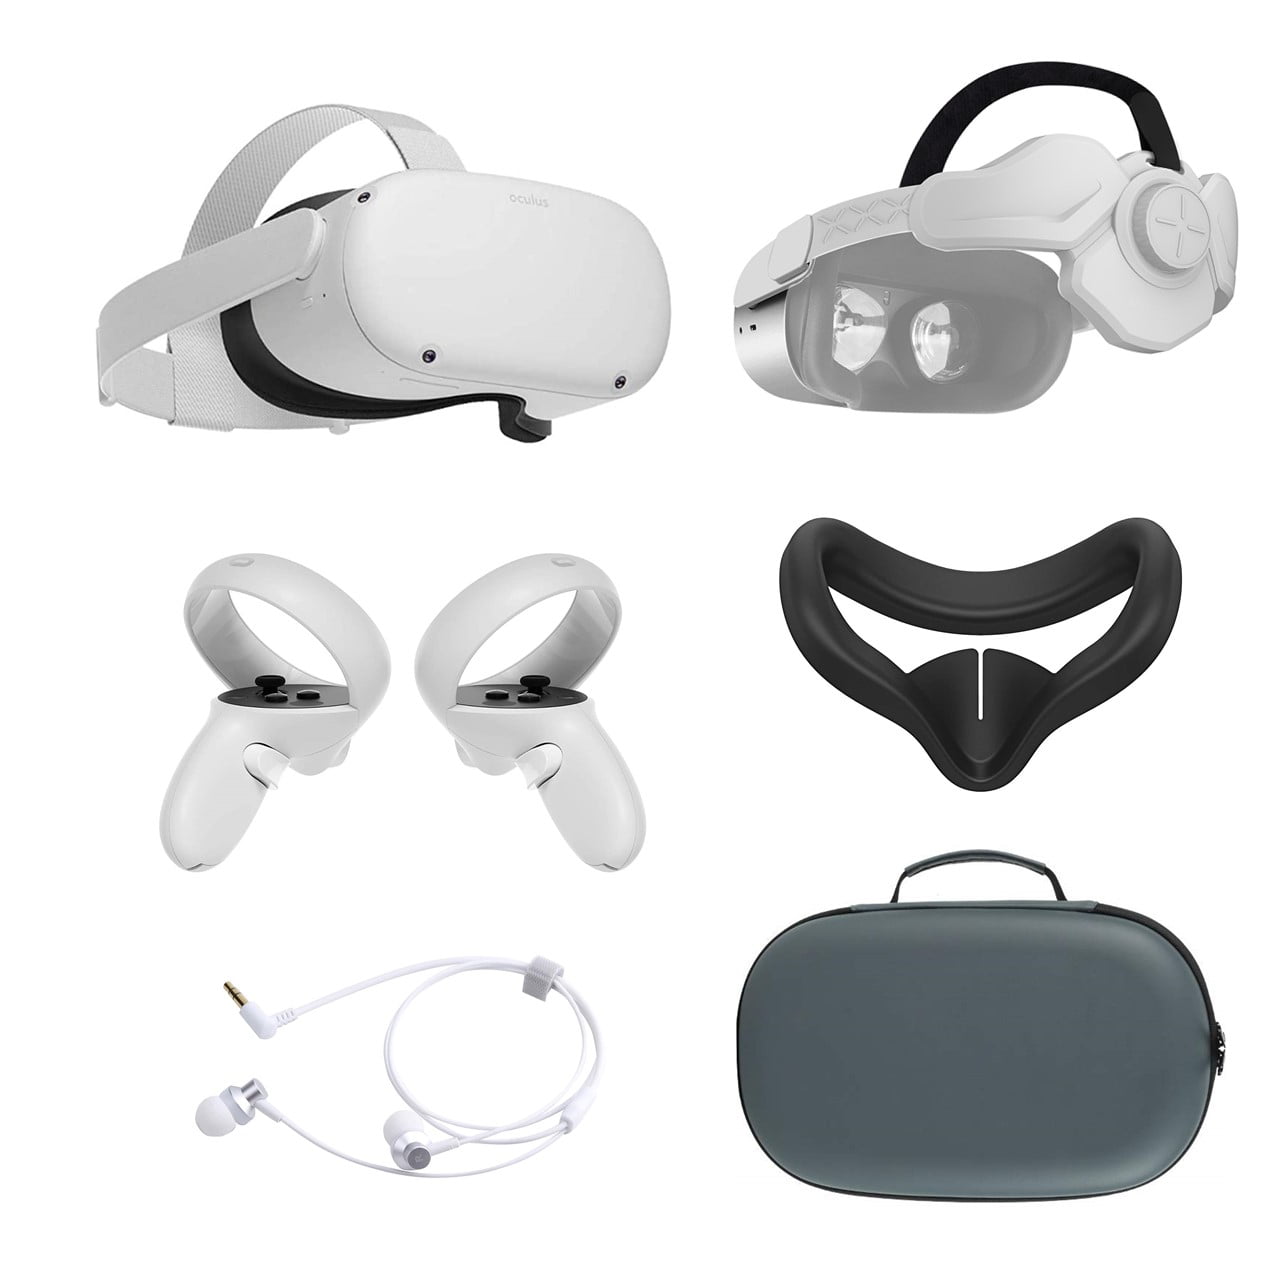 2021 Oculus Quest 2 All-In-One VR Headset, Touch Controllers, 256GB SSD,  1832x1920 up to 90 Hz Refresh Rate LCD, 3D Audio, Mytrix Head Strap,  Carrying 